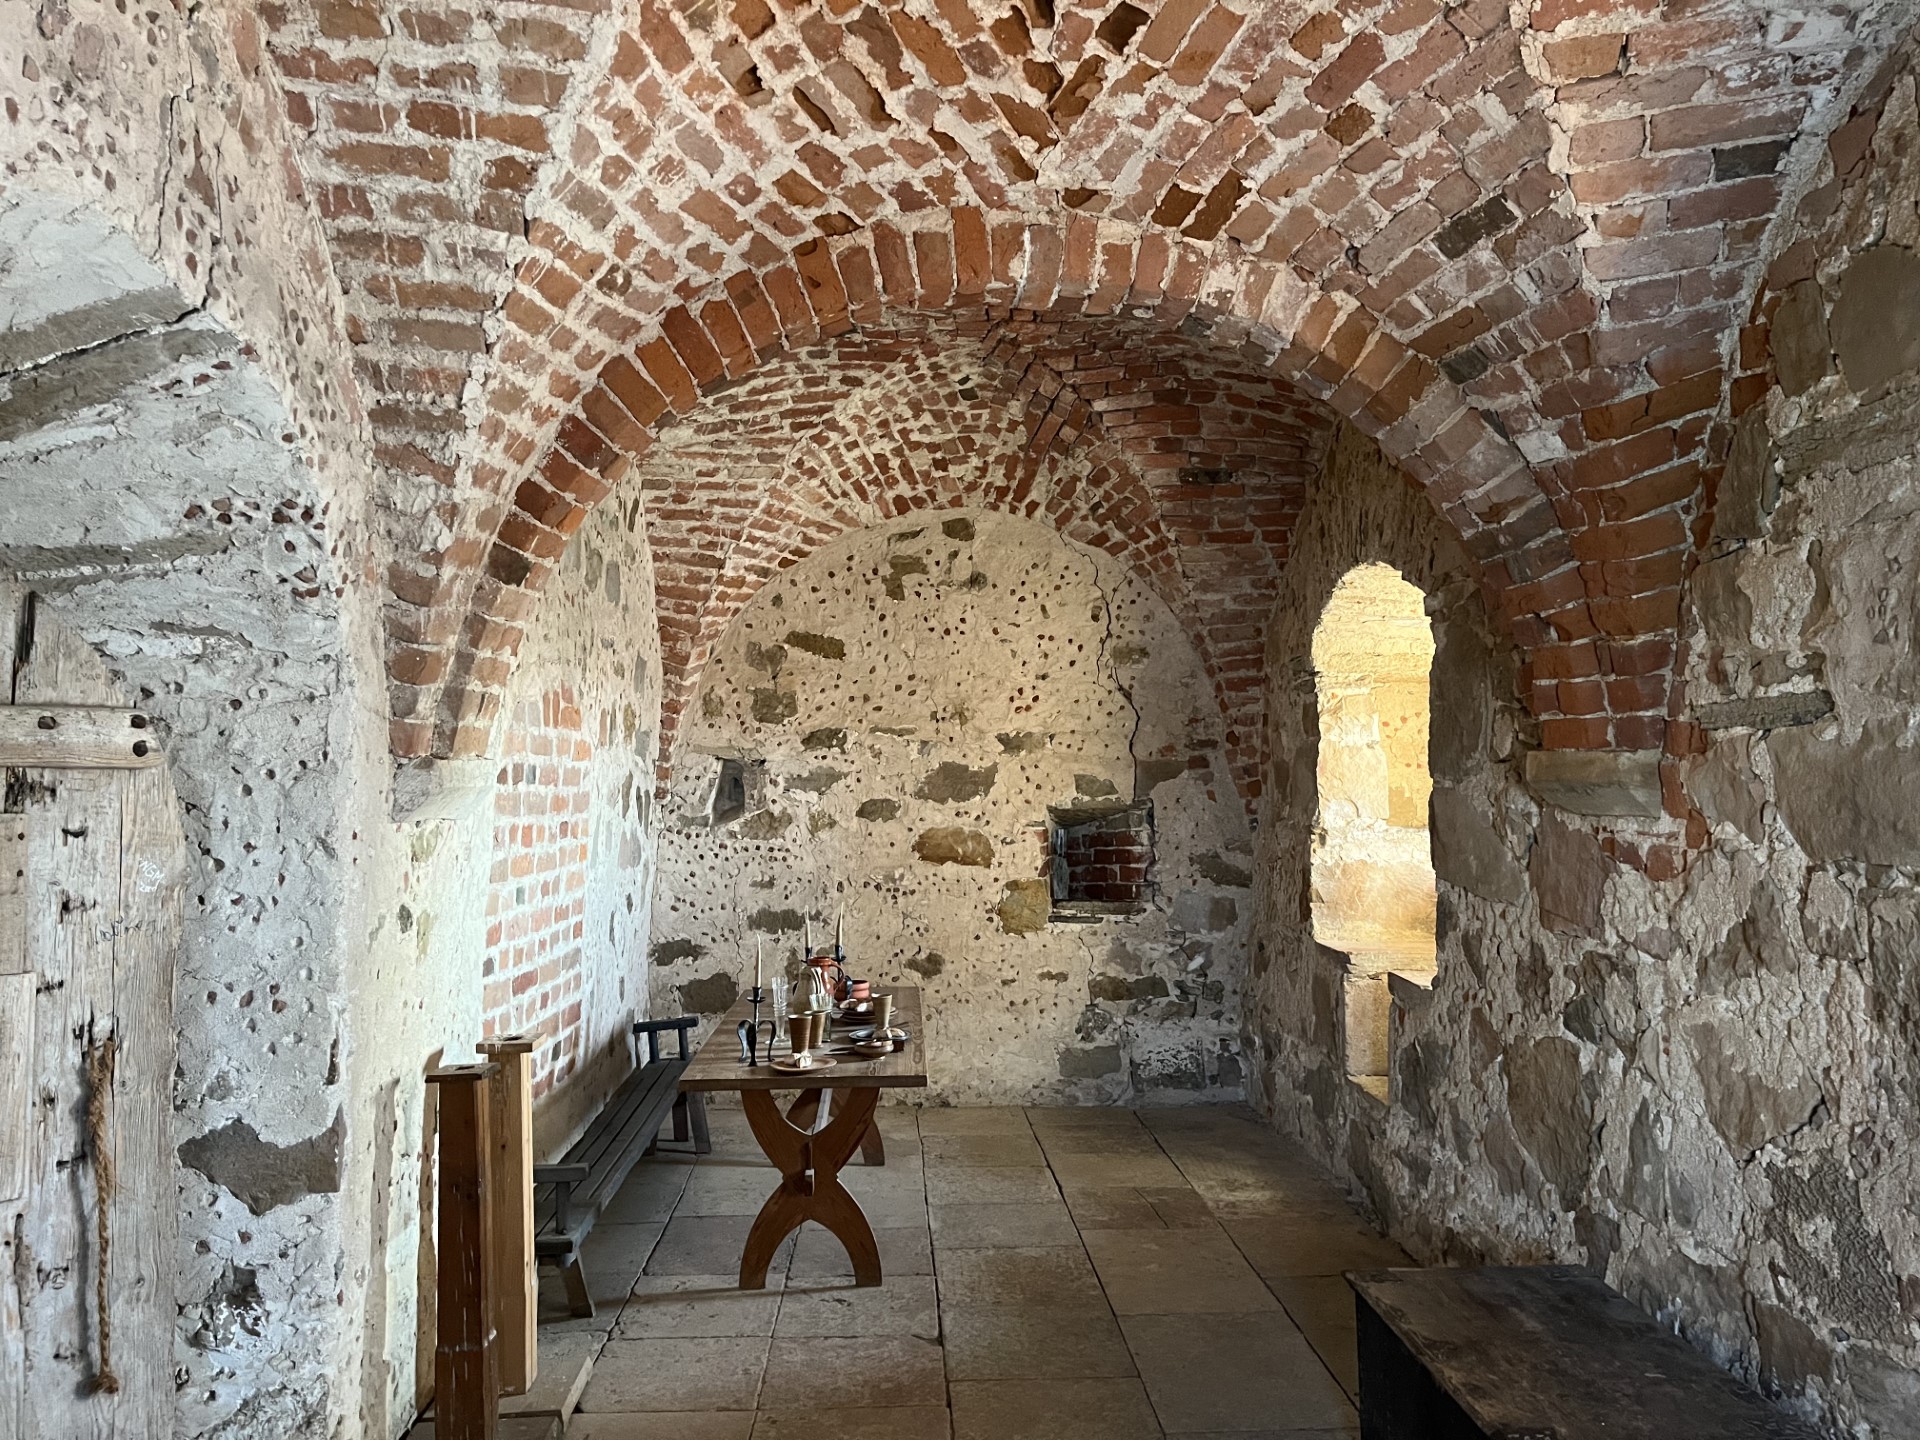 The picture shows a long, narrow room in the castle with a brick vault. Along the long sides are furniture such as a chest, bench and chair.